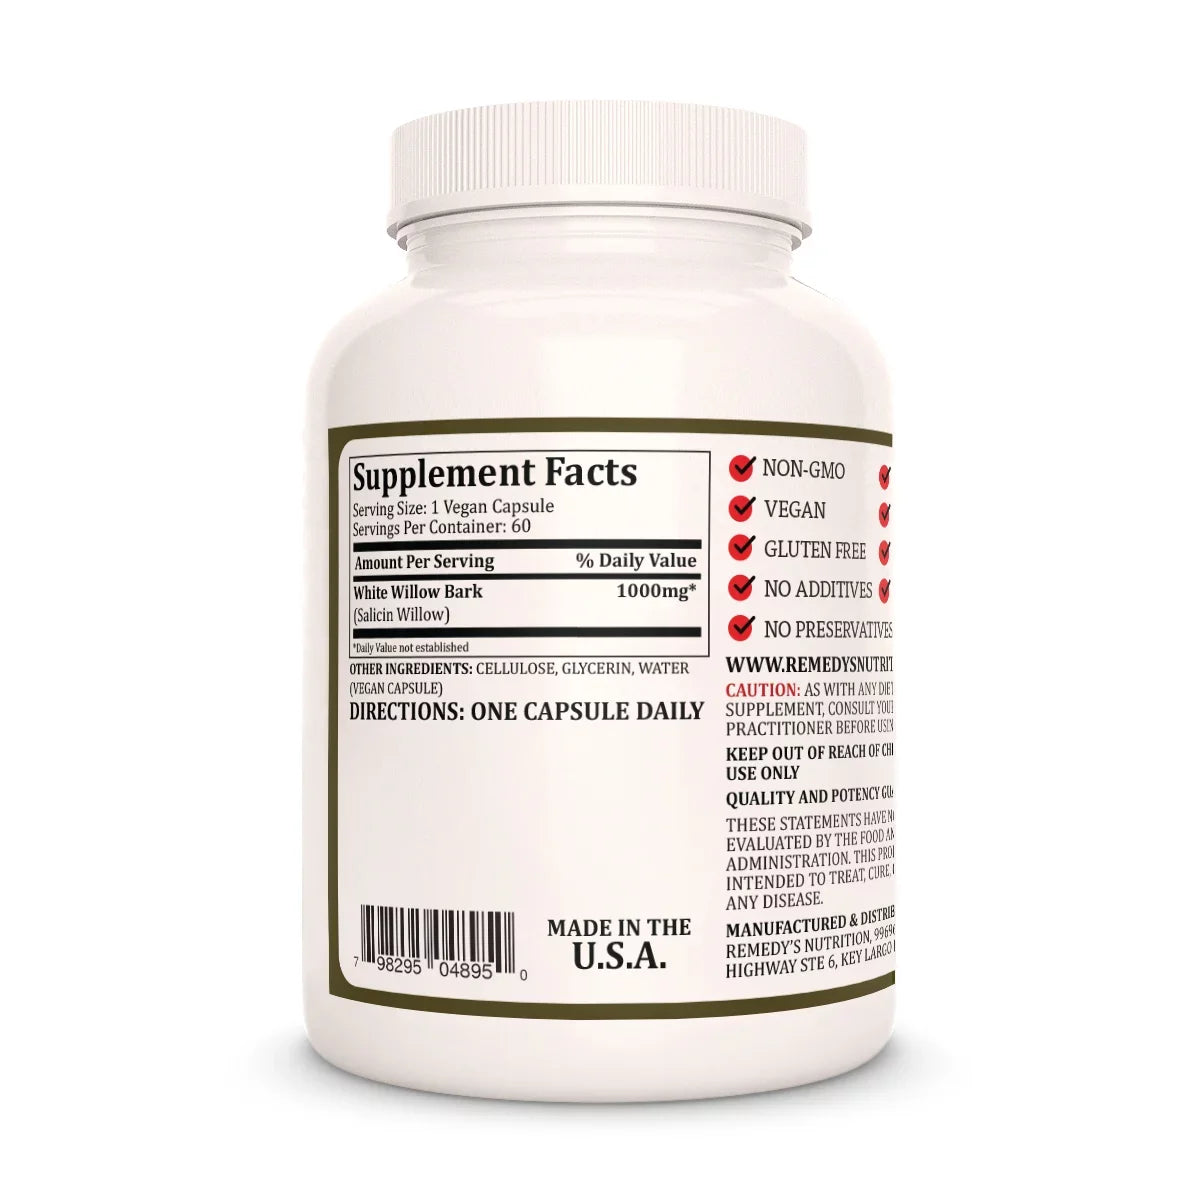 Image of Remedy's Nutrition® White Willow Bark back bottle label. Supplement Facts, Ingredients and Directions. Salix alba.